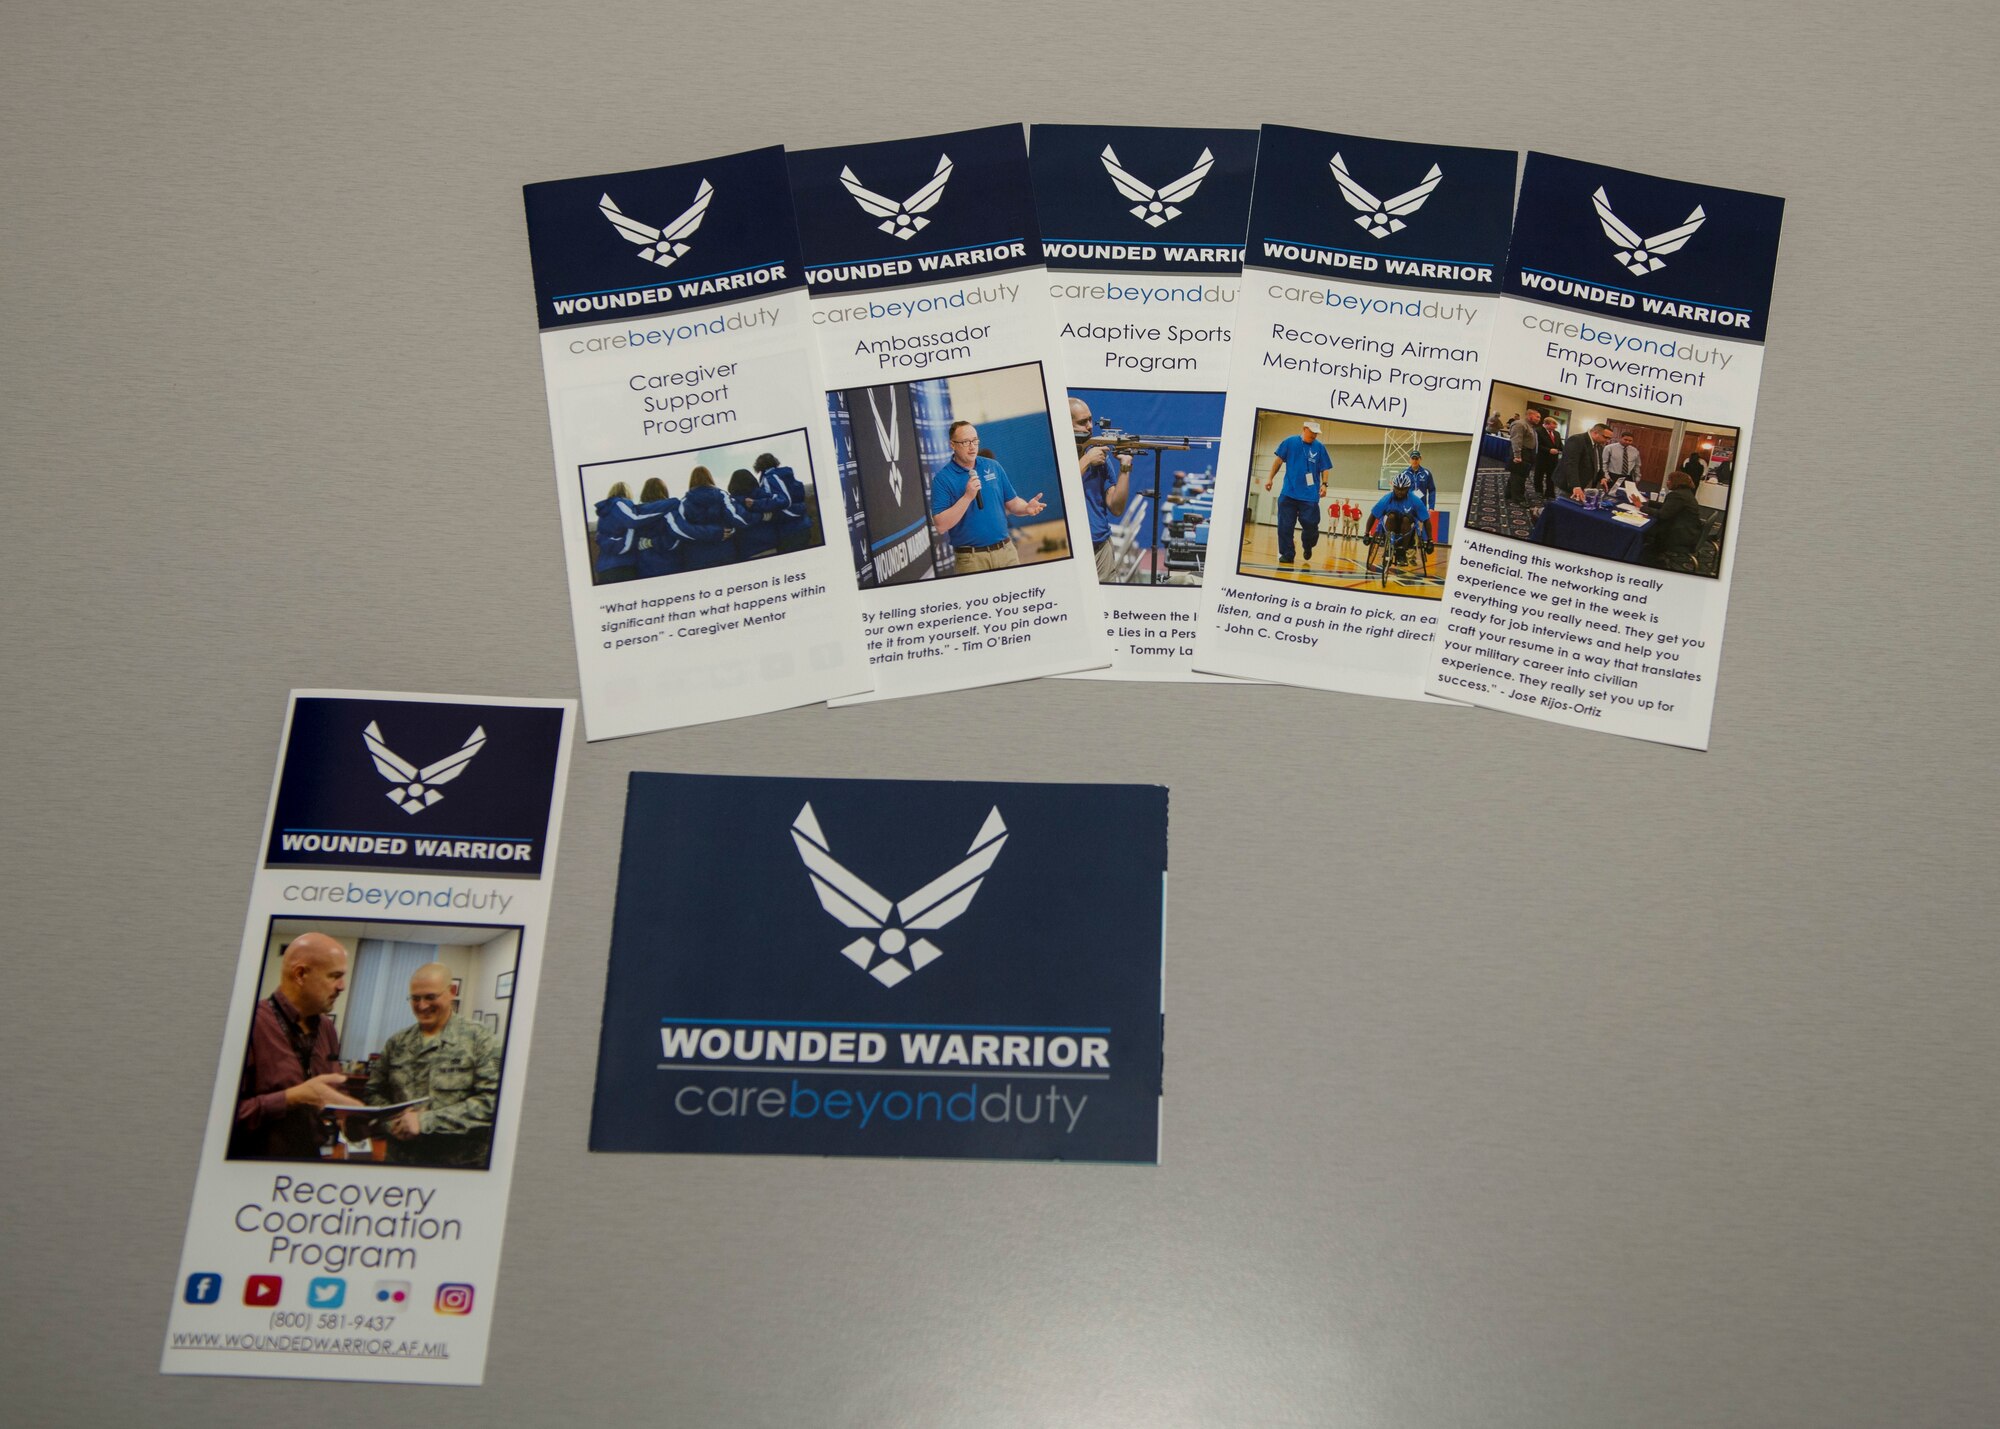 The Air Force defines a Wounded Warrior as any Airman who is seriously wounded, ill or injured that may require a Medical Evaluation Board or Physical Evaluation Board to determine fitness for duty. As of July 1, 2019, the AFW2 program has an active population of 3,569, made up of 875 illnesses, 1,867 psychological wounds and 827 physical wounds. Eighty-five percent of the current enrollments are non-combat related. (U.S. Air Force photo by Airman 1st Class Kindra Stewart)